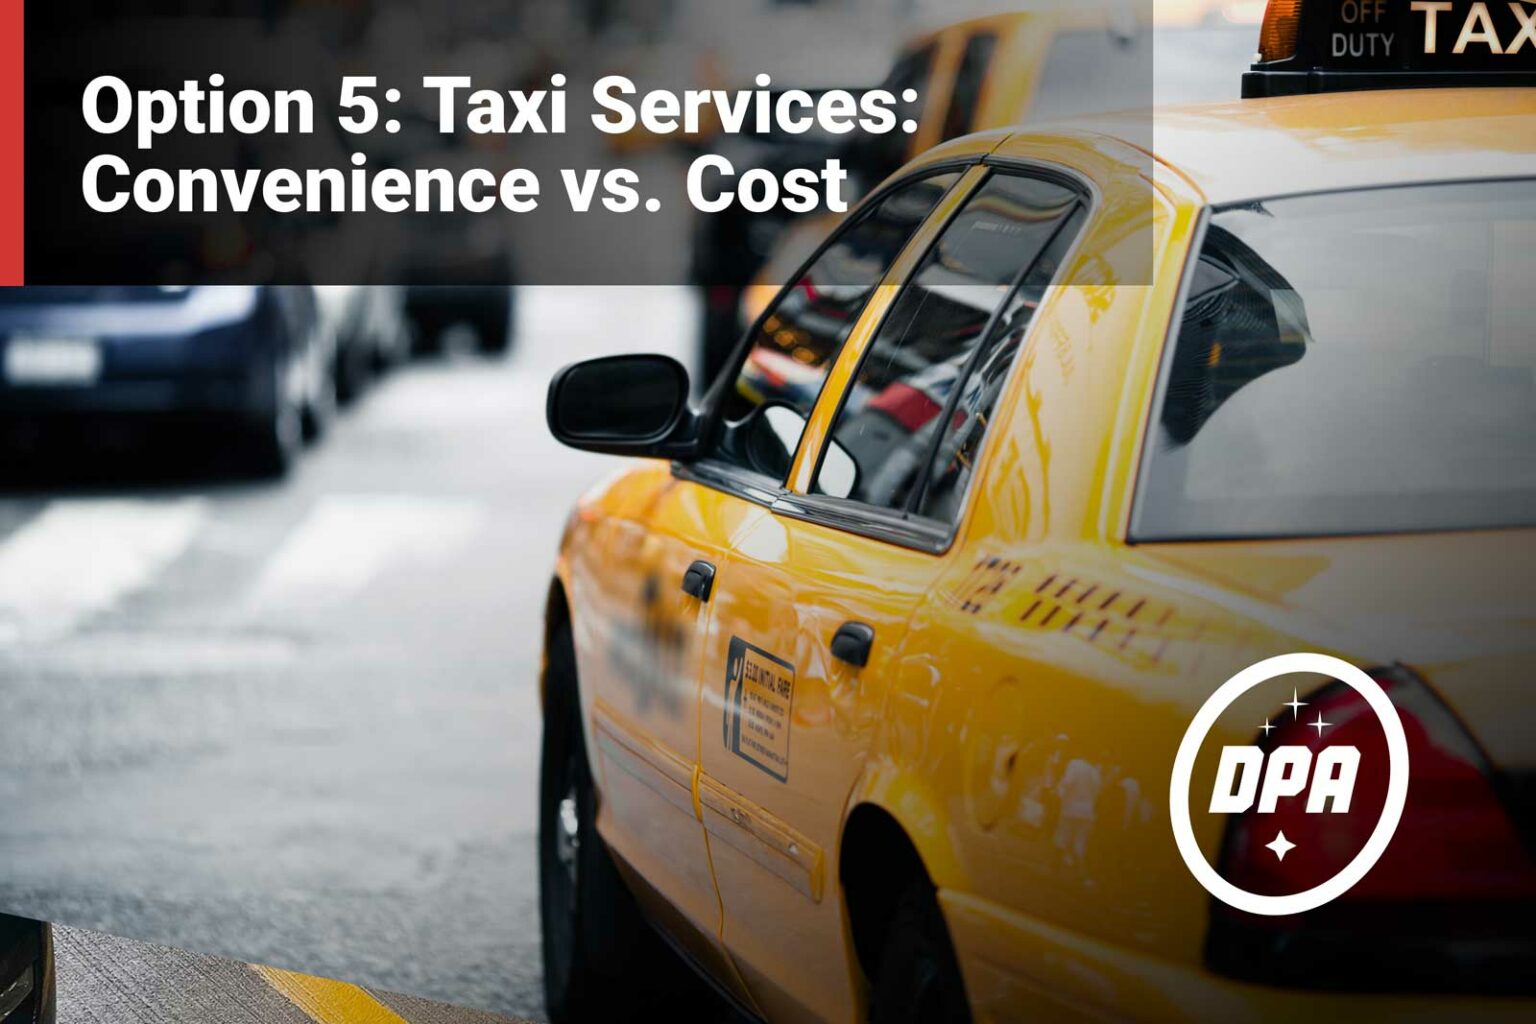 Option 5: Taxi Services: Convenience vs. Cost